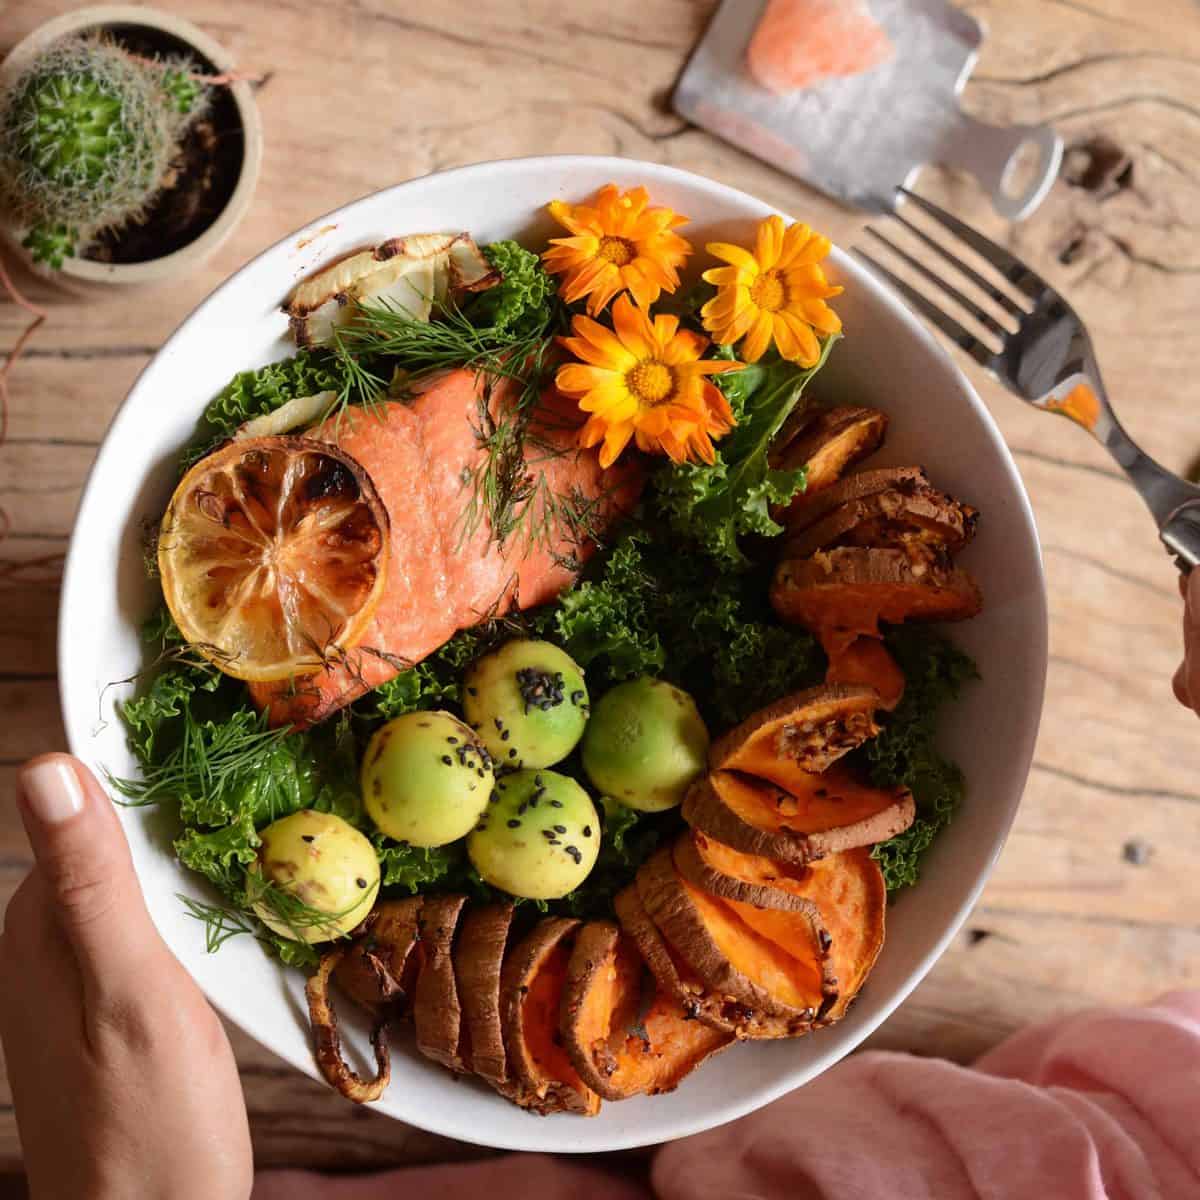 Grilled salmon with cake and baked sweet potato in a bowl